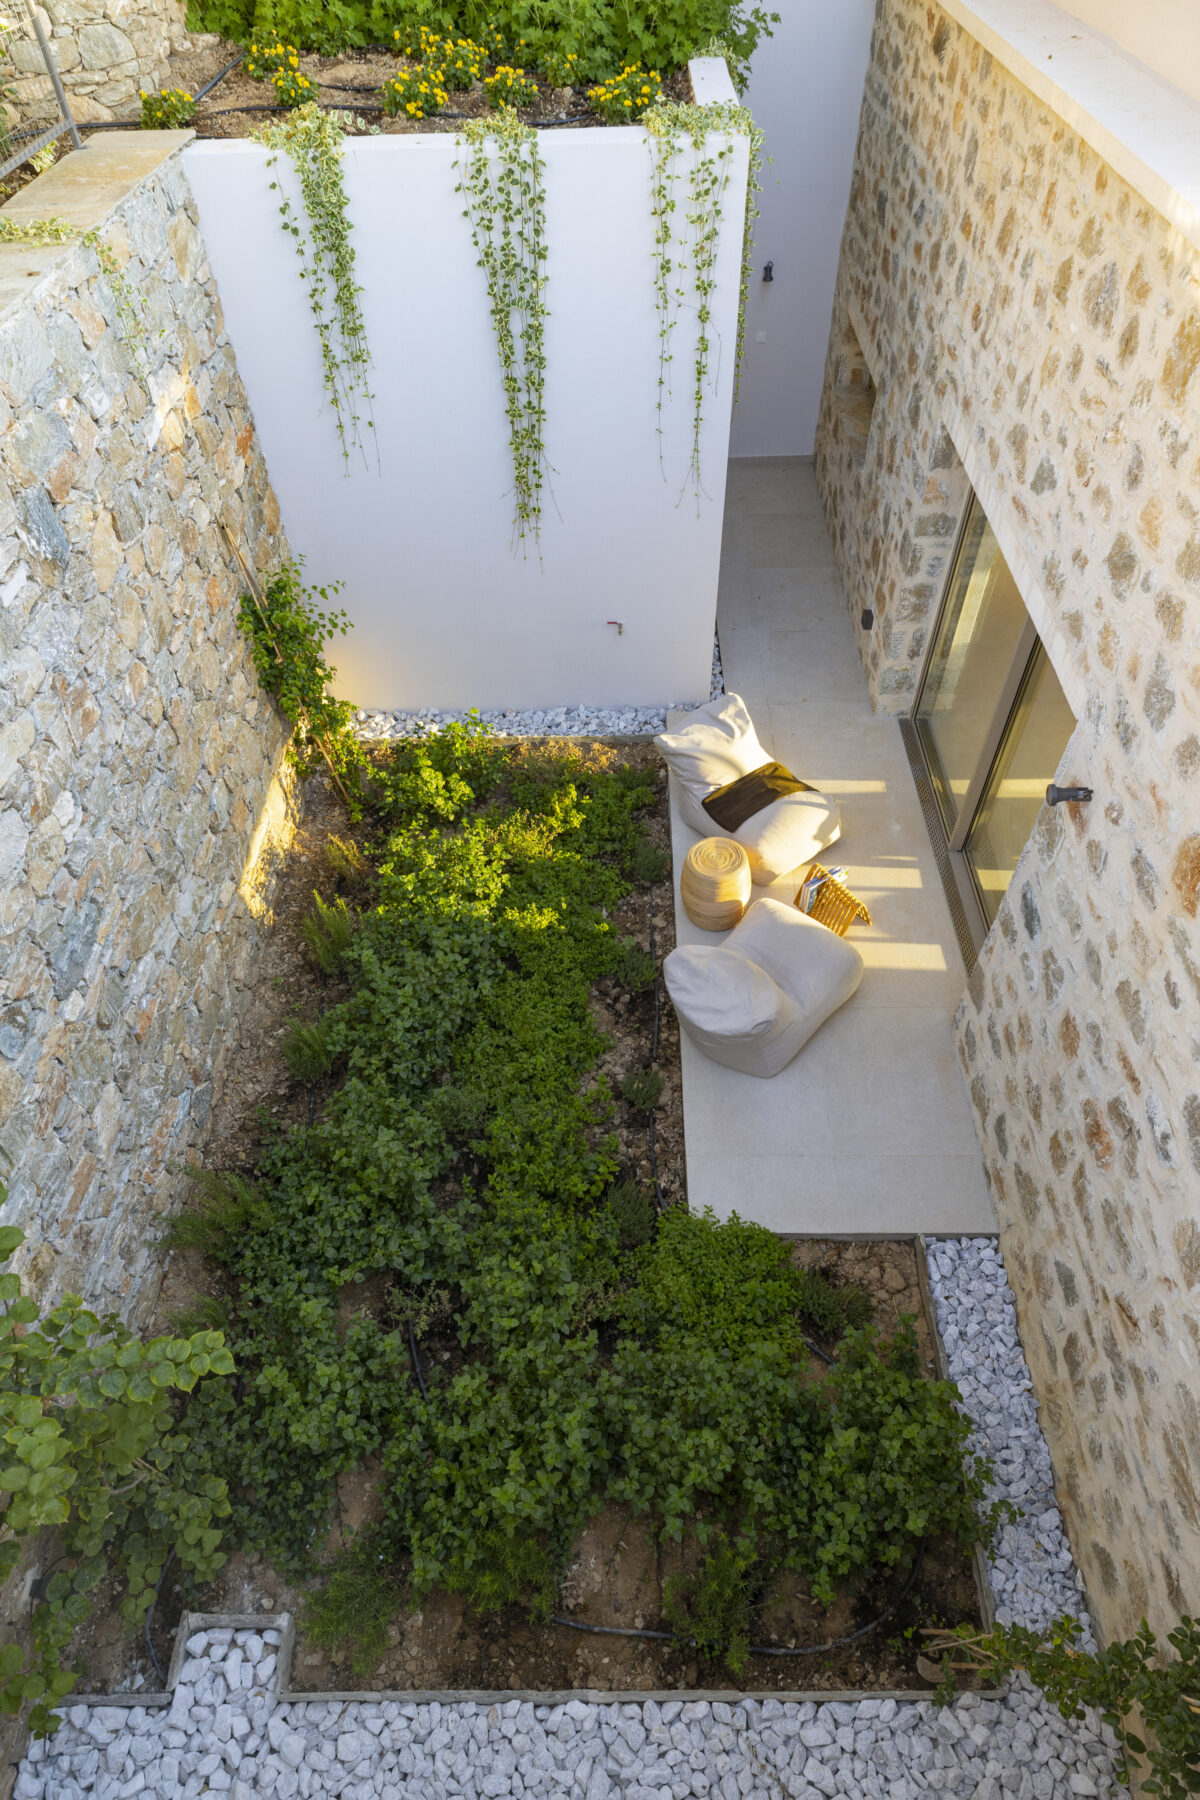 Archisearch Atrium Villas ΙΙ – 3 houses in Kehria Skiathos designed by 3harchitects.